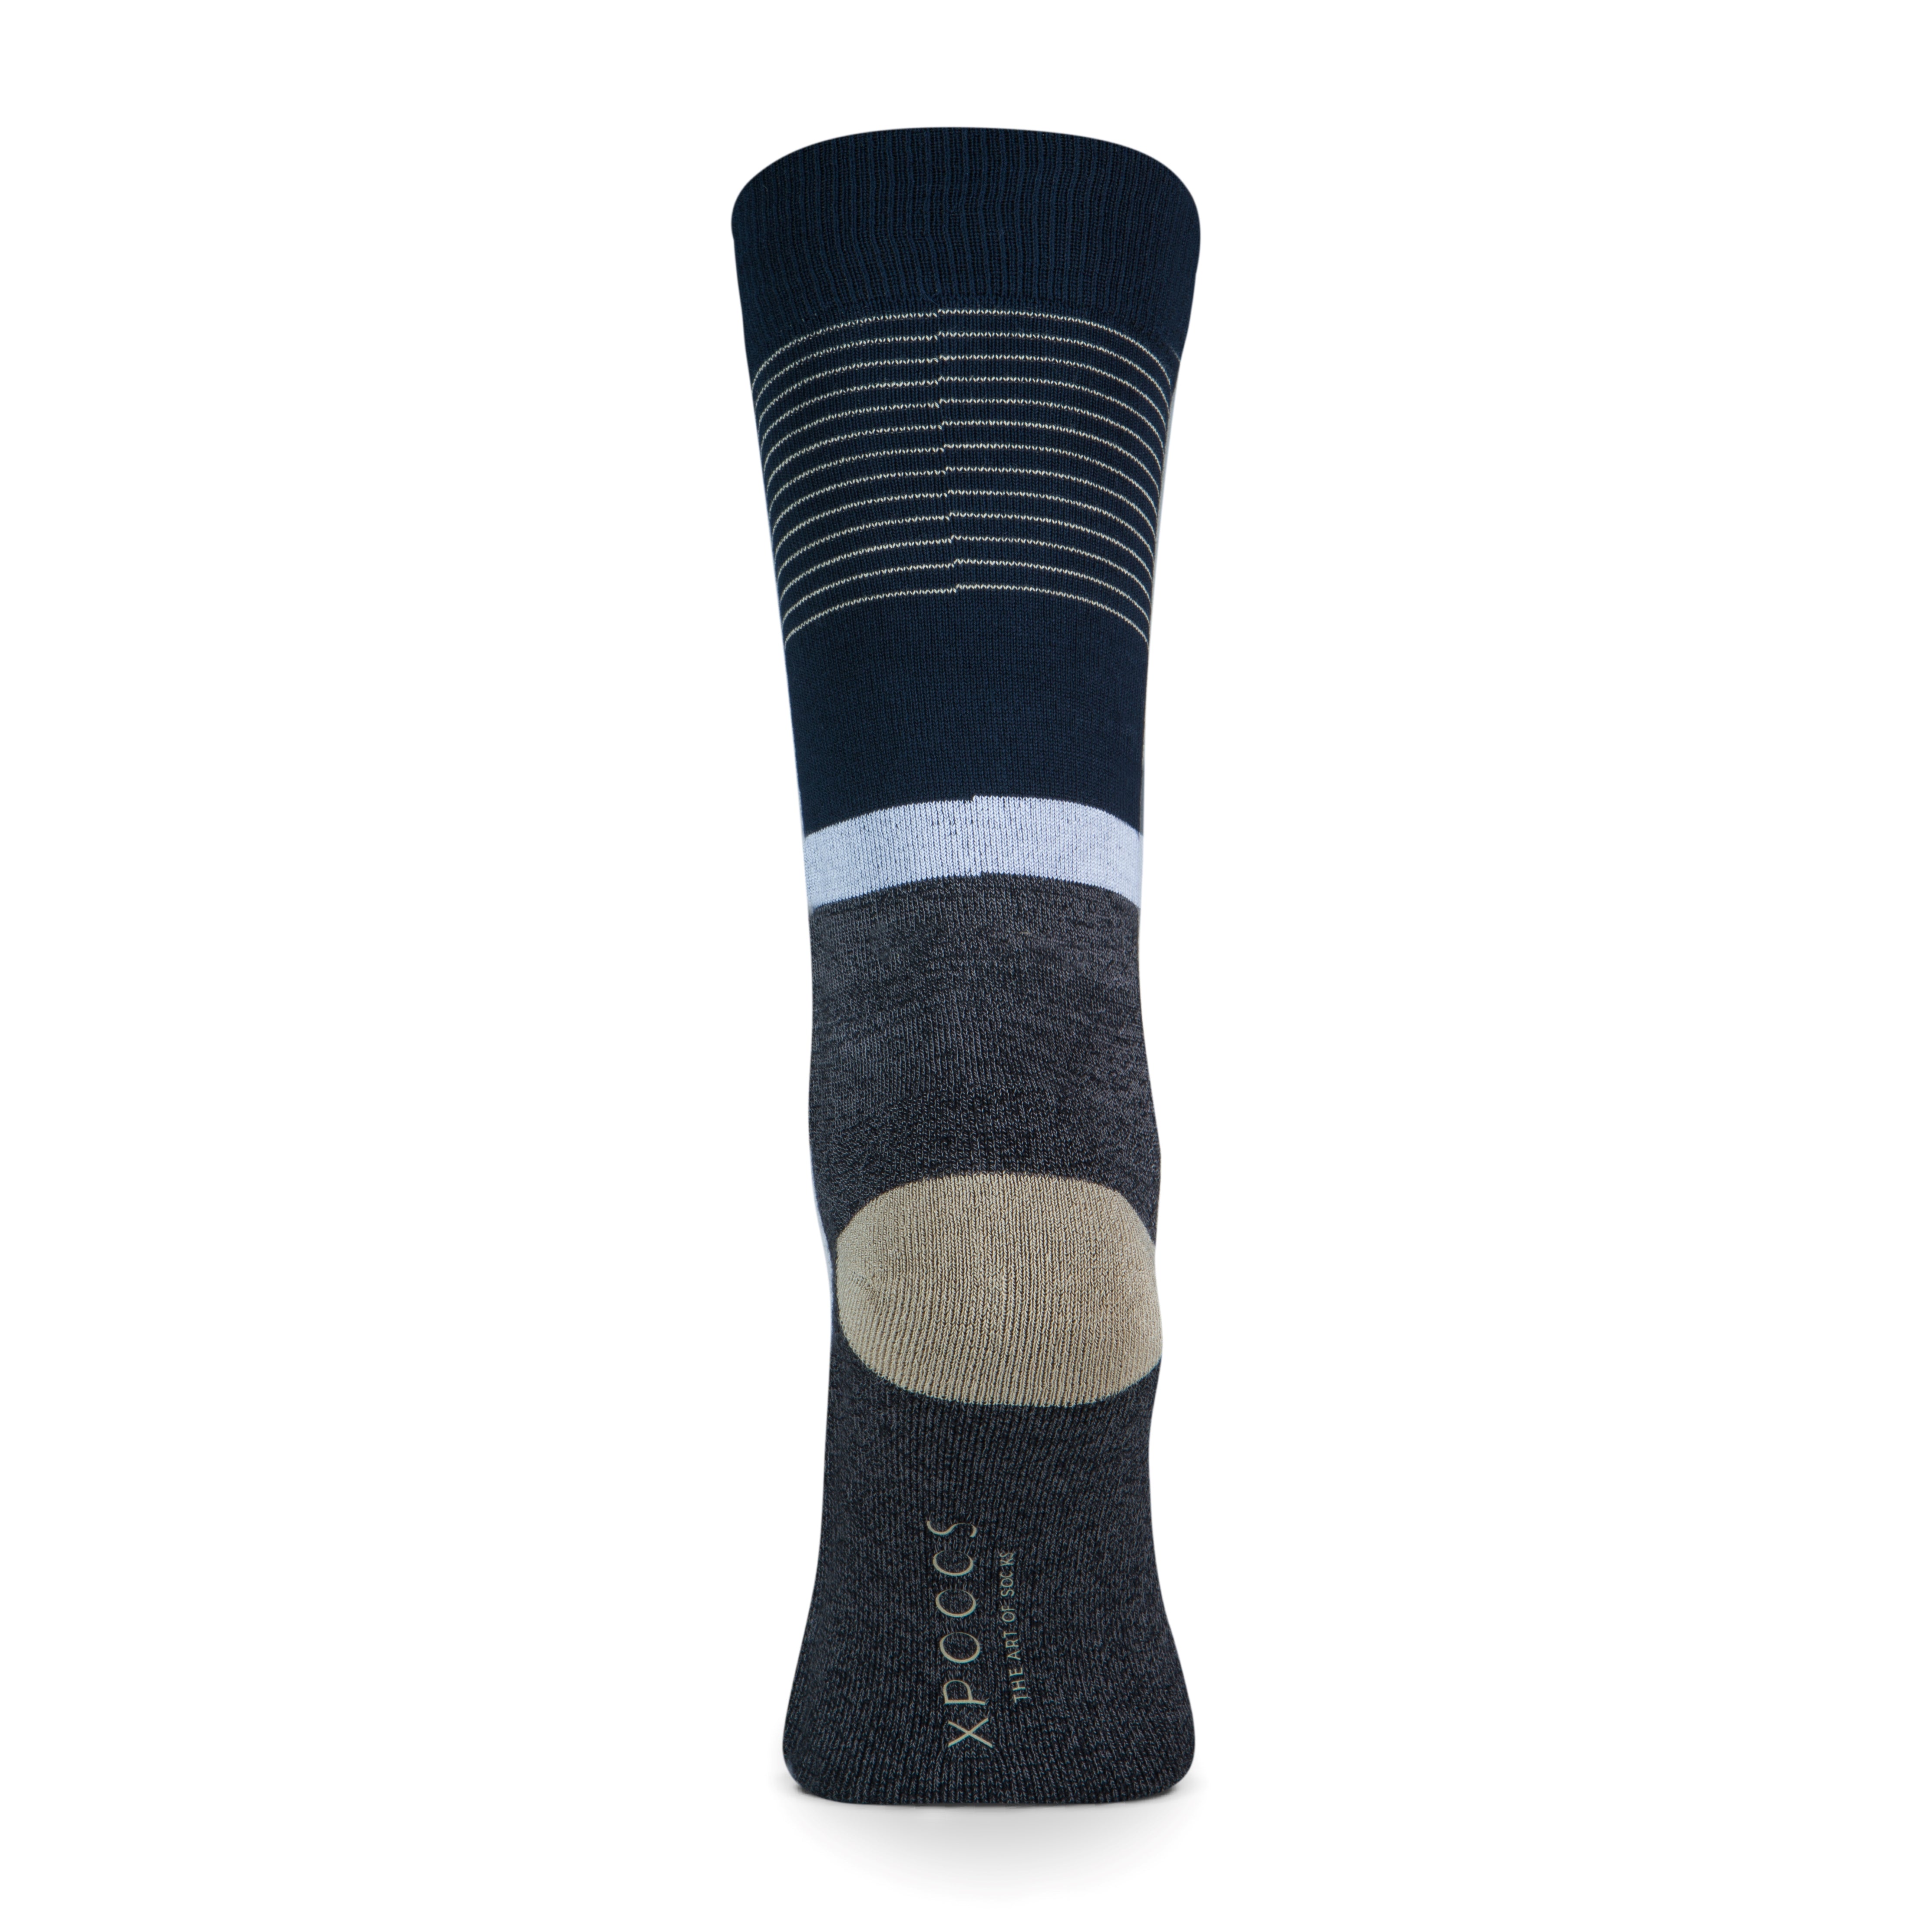 Hong Kong chaussettes pour hommes Anthracite